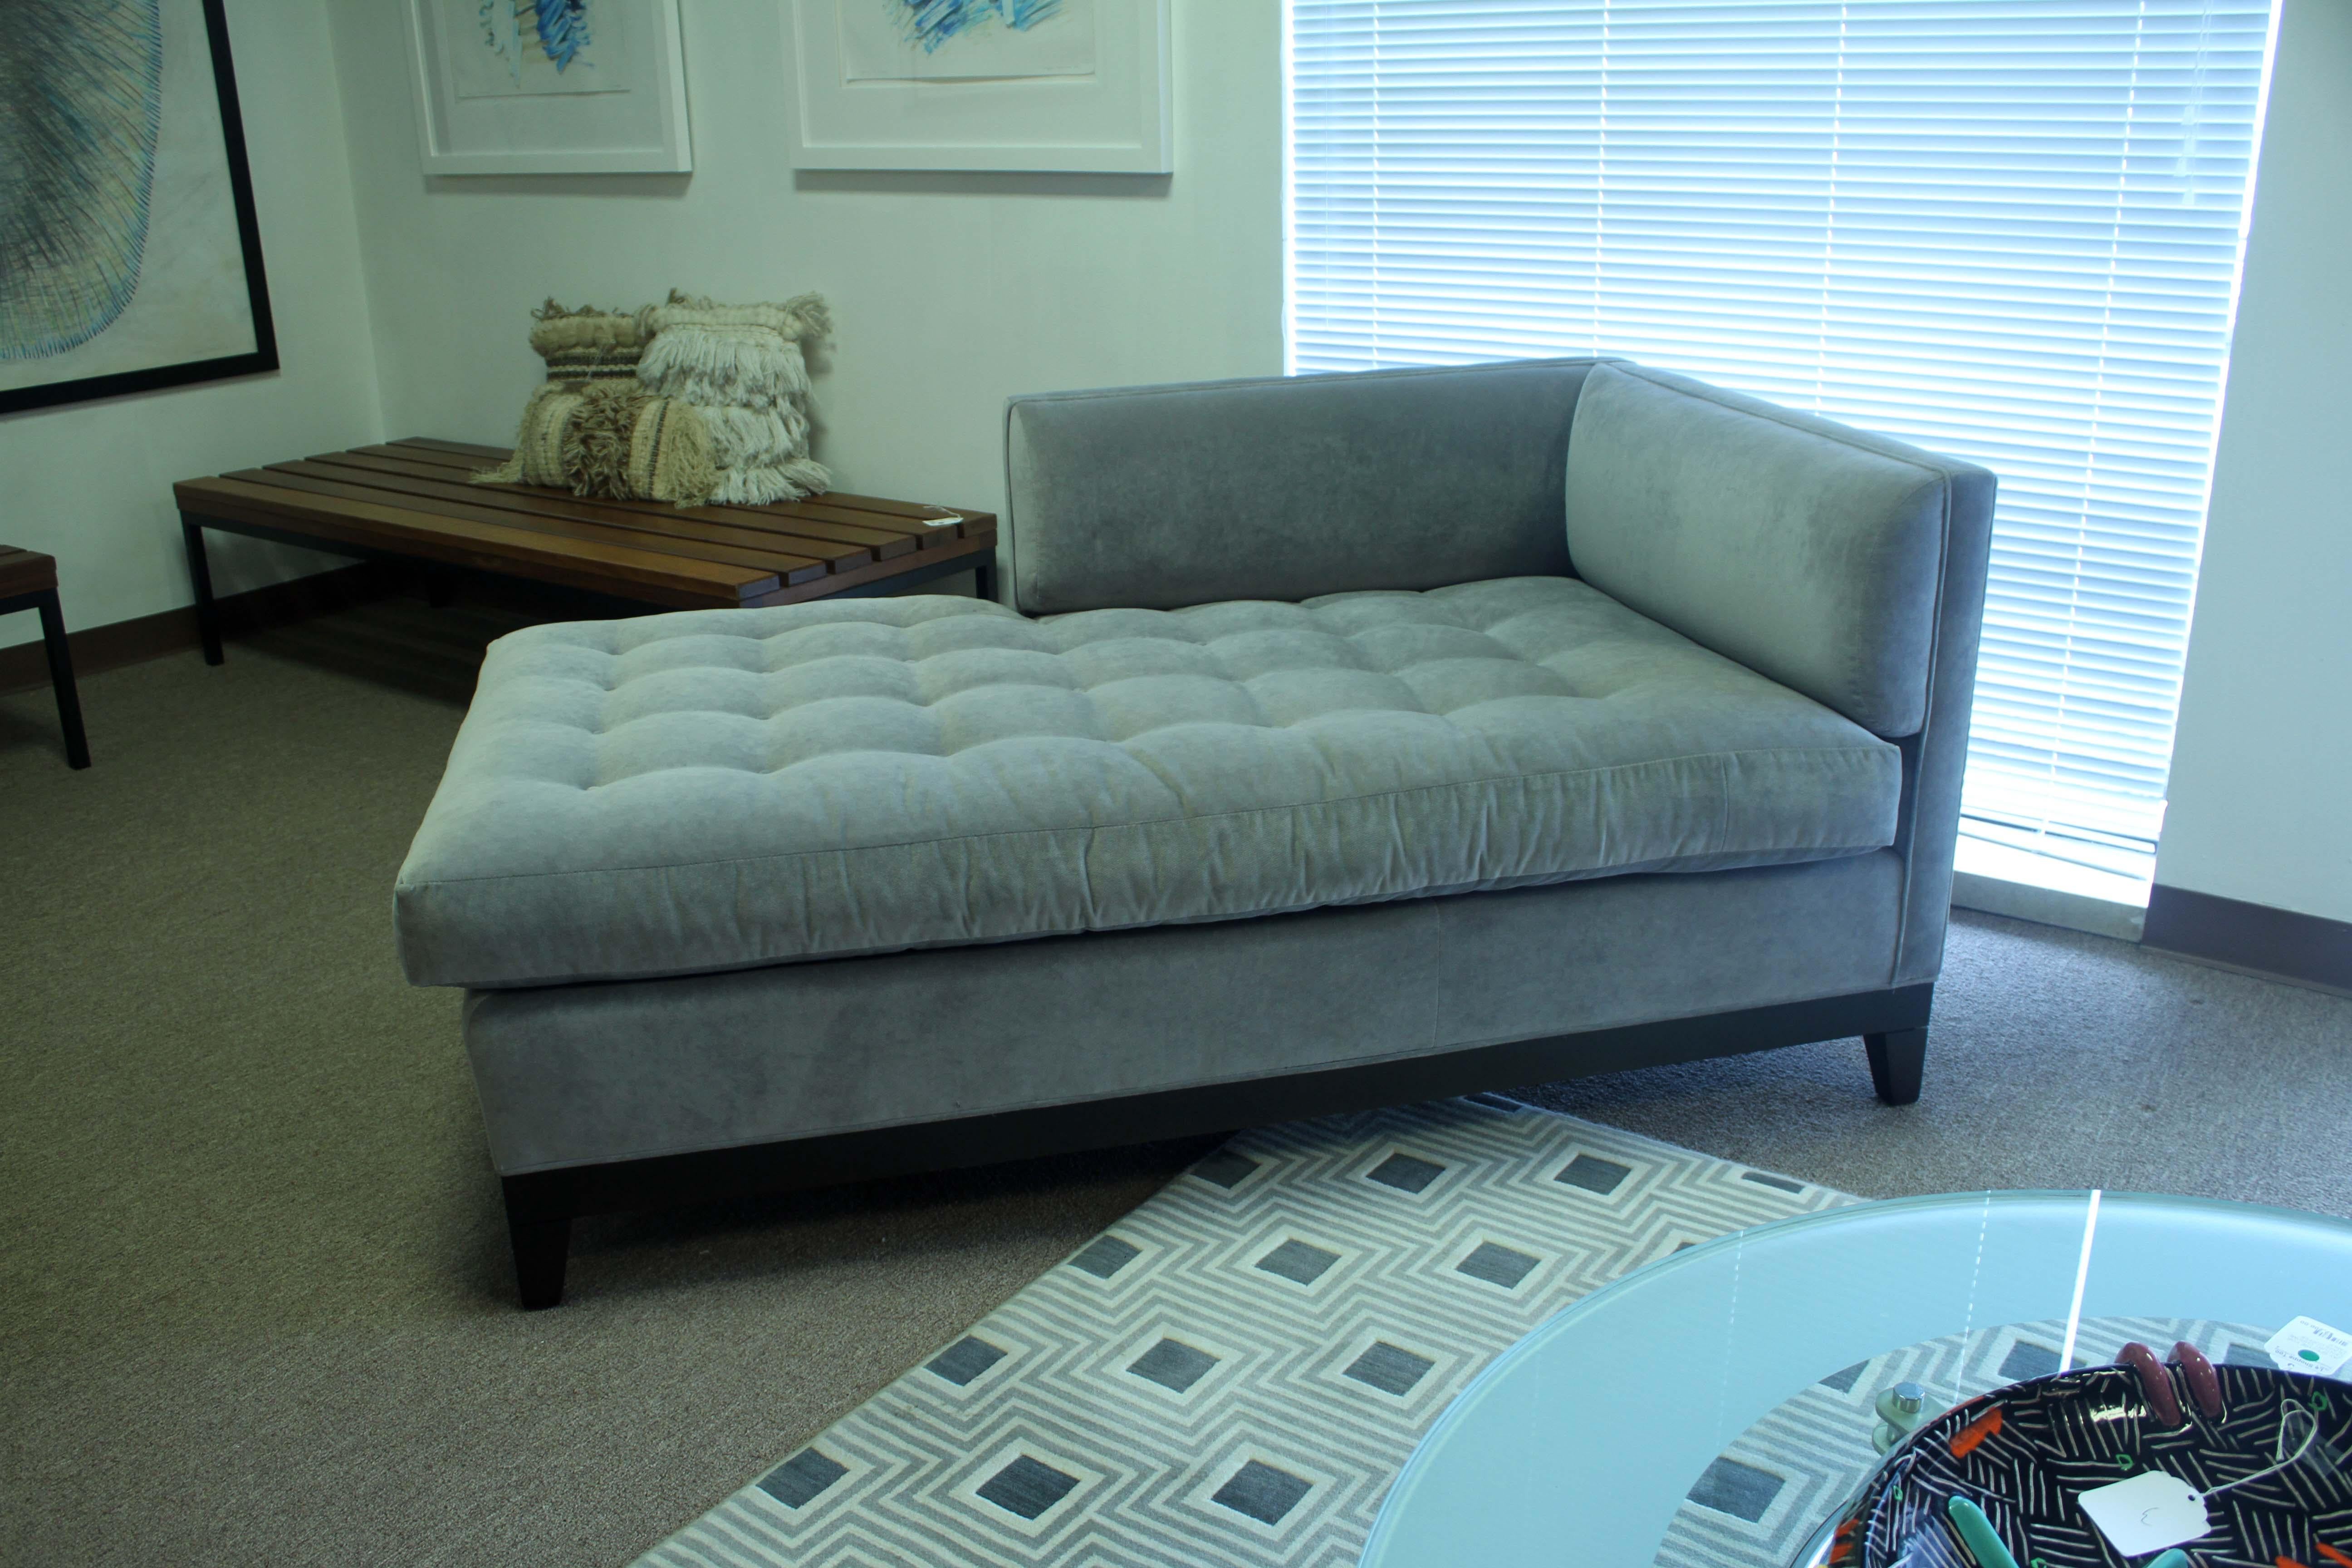 This Pearson grey tufted chaise is the perfect addition to any living room or bedroom. Its timeless grey upholstery adds a sophisticated touch to any room, while its tufted design brings an elegant and timeless look. Its plush cushioning provides